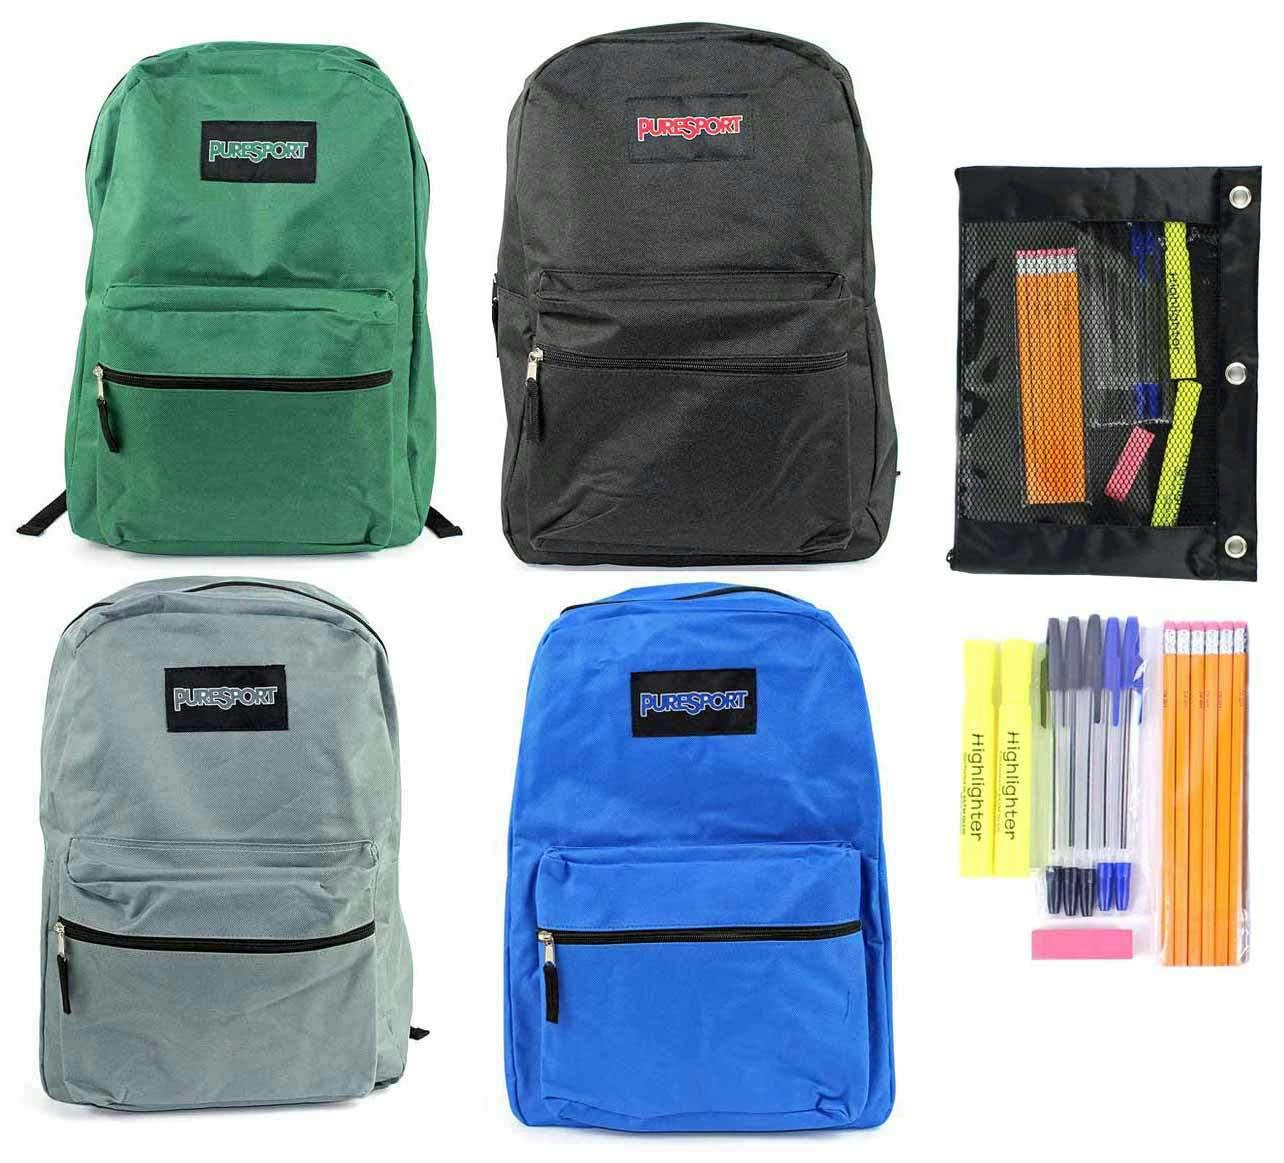 Wholesale High School Backpack & School Supply Kit - 16 Pieces, Blue